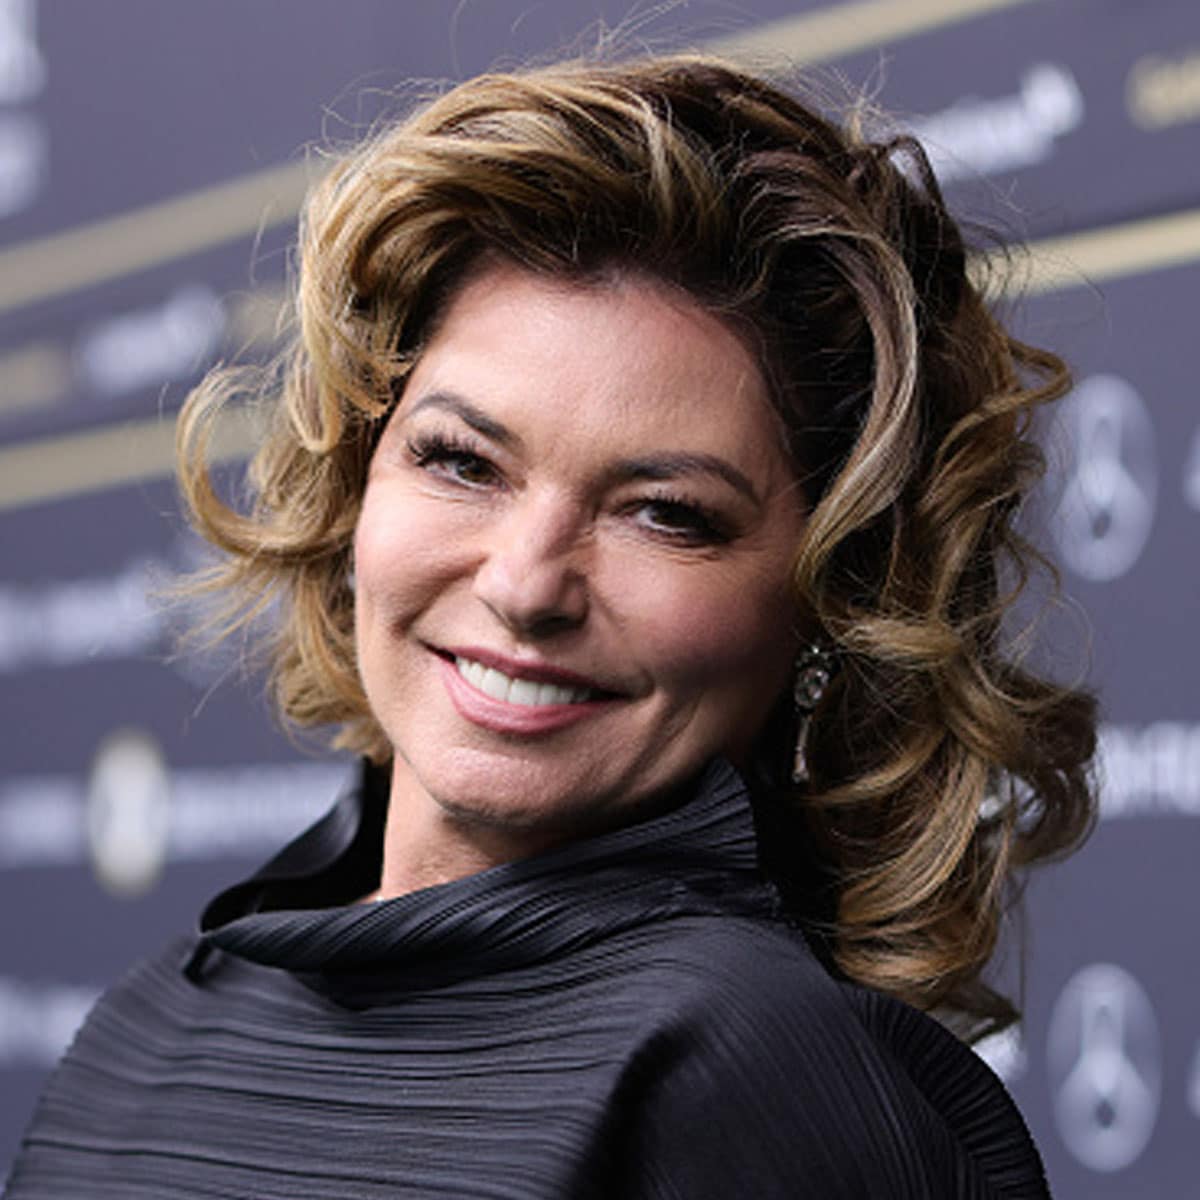 Shania Twain arrives for the ZFF Golden Icon Award ceremony and "Casino" screening